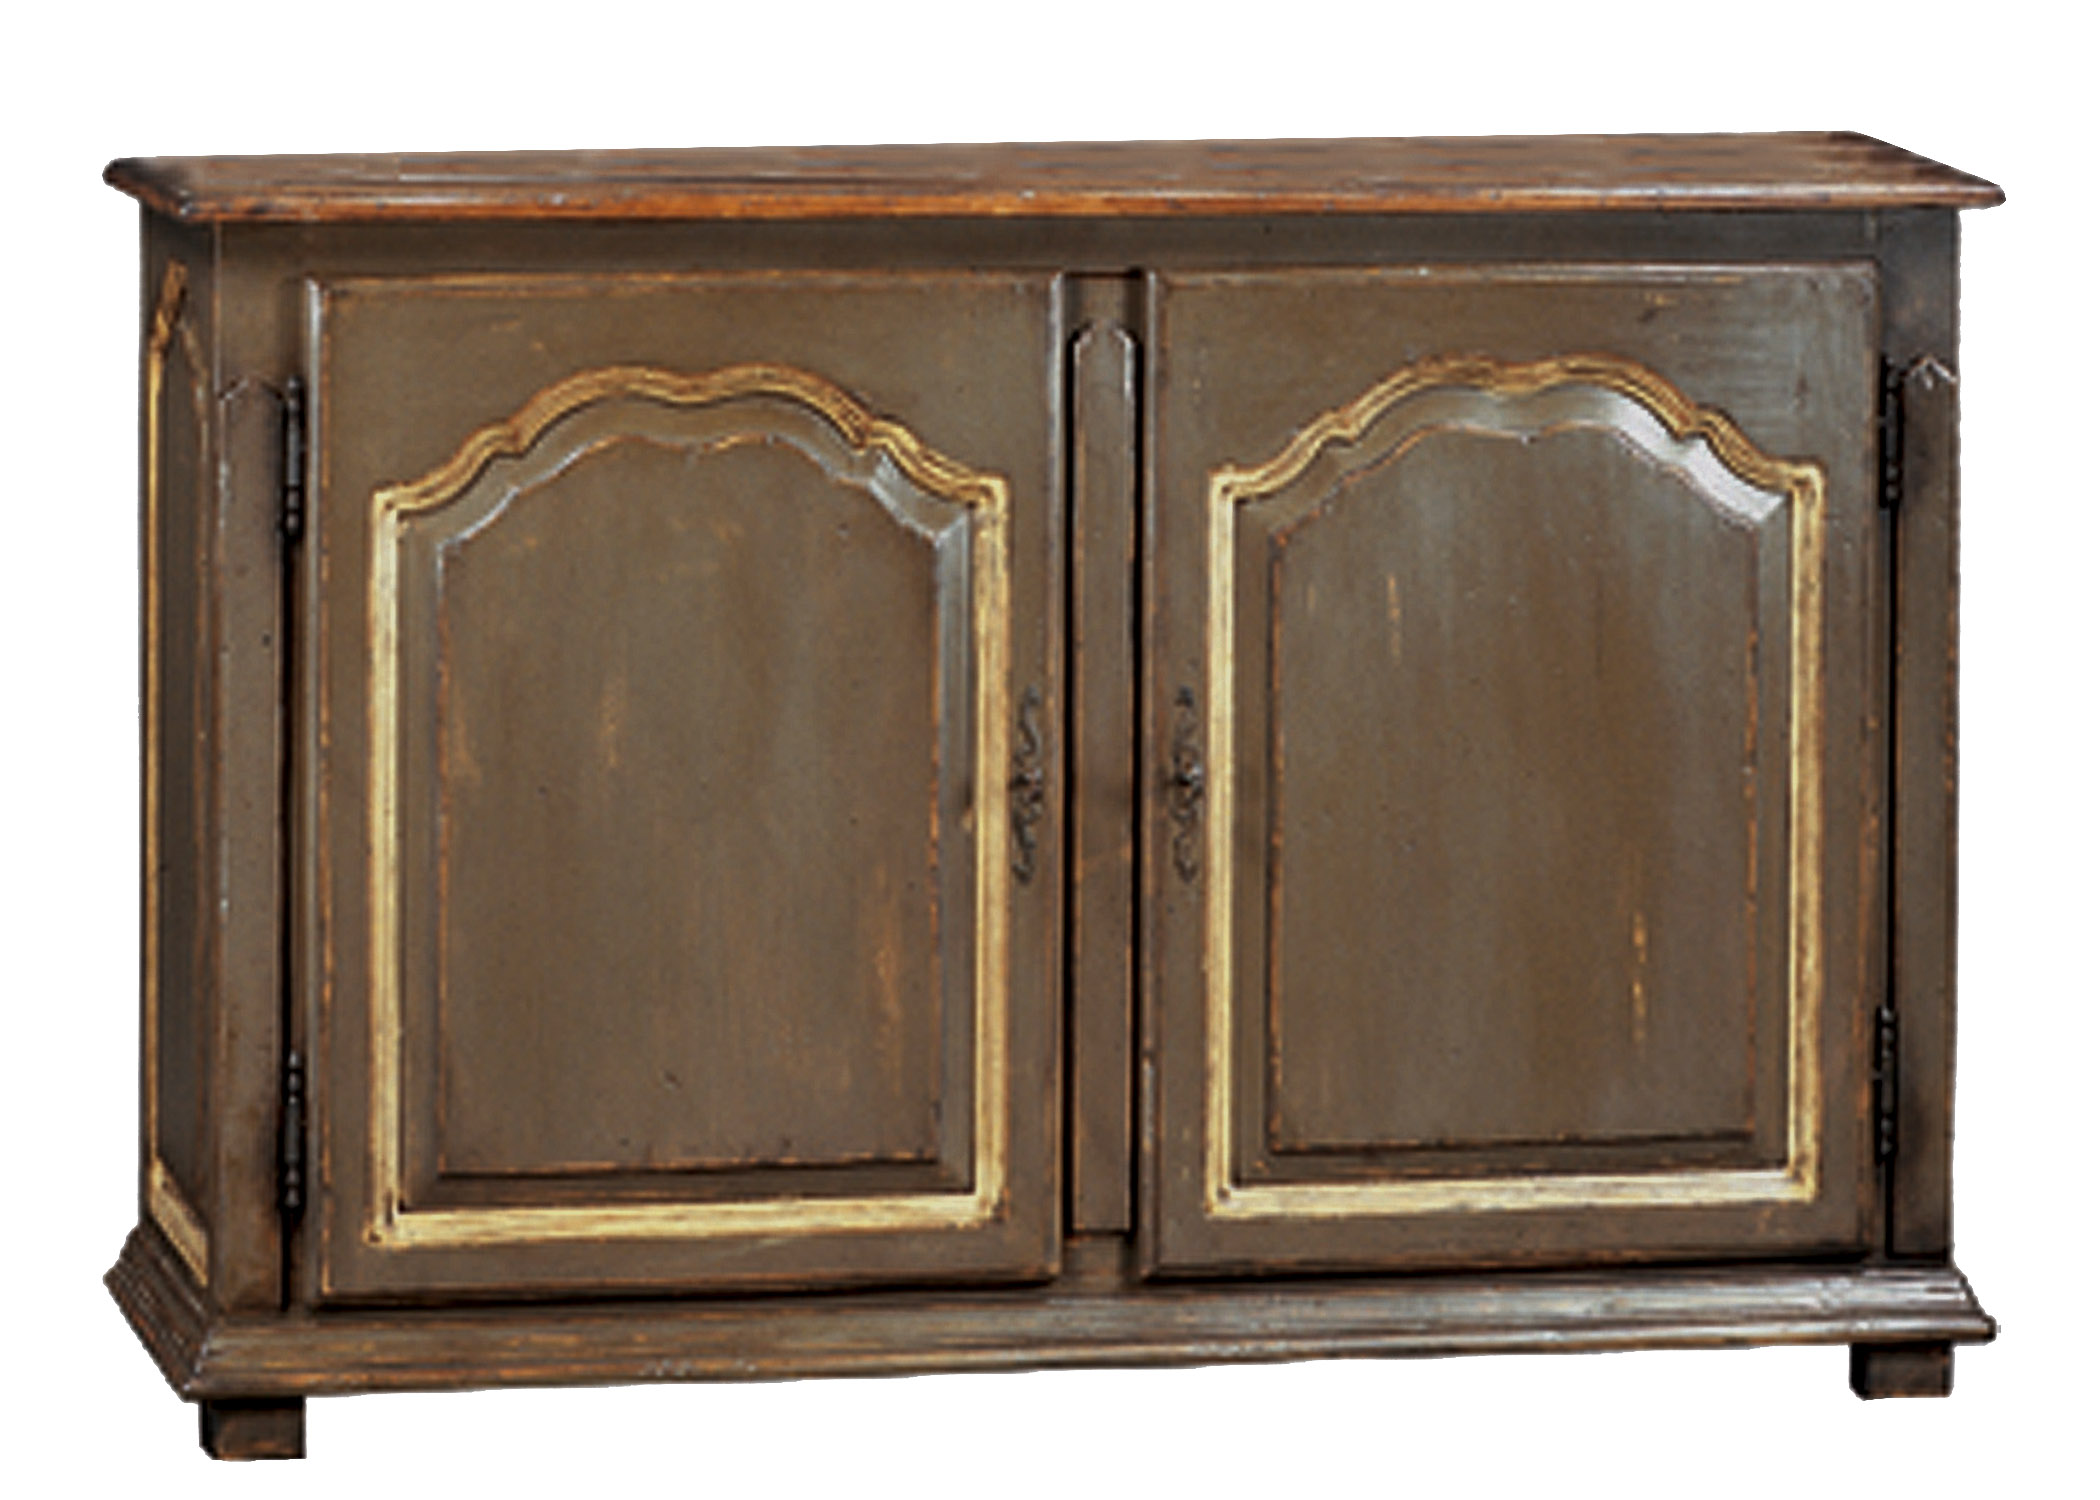 Hampton painted buffet cabinet by Woodland furniture in Idaho Falls